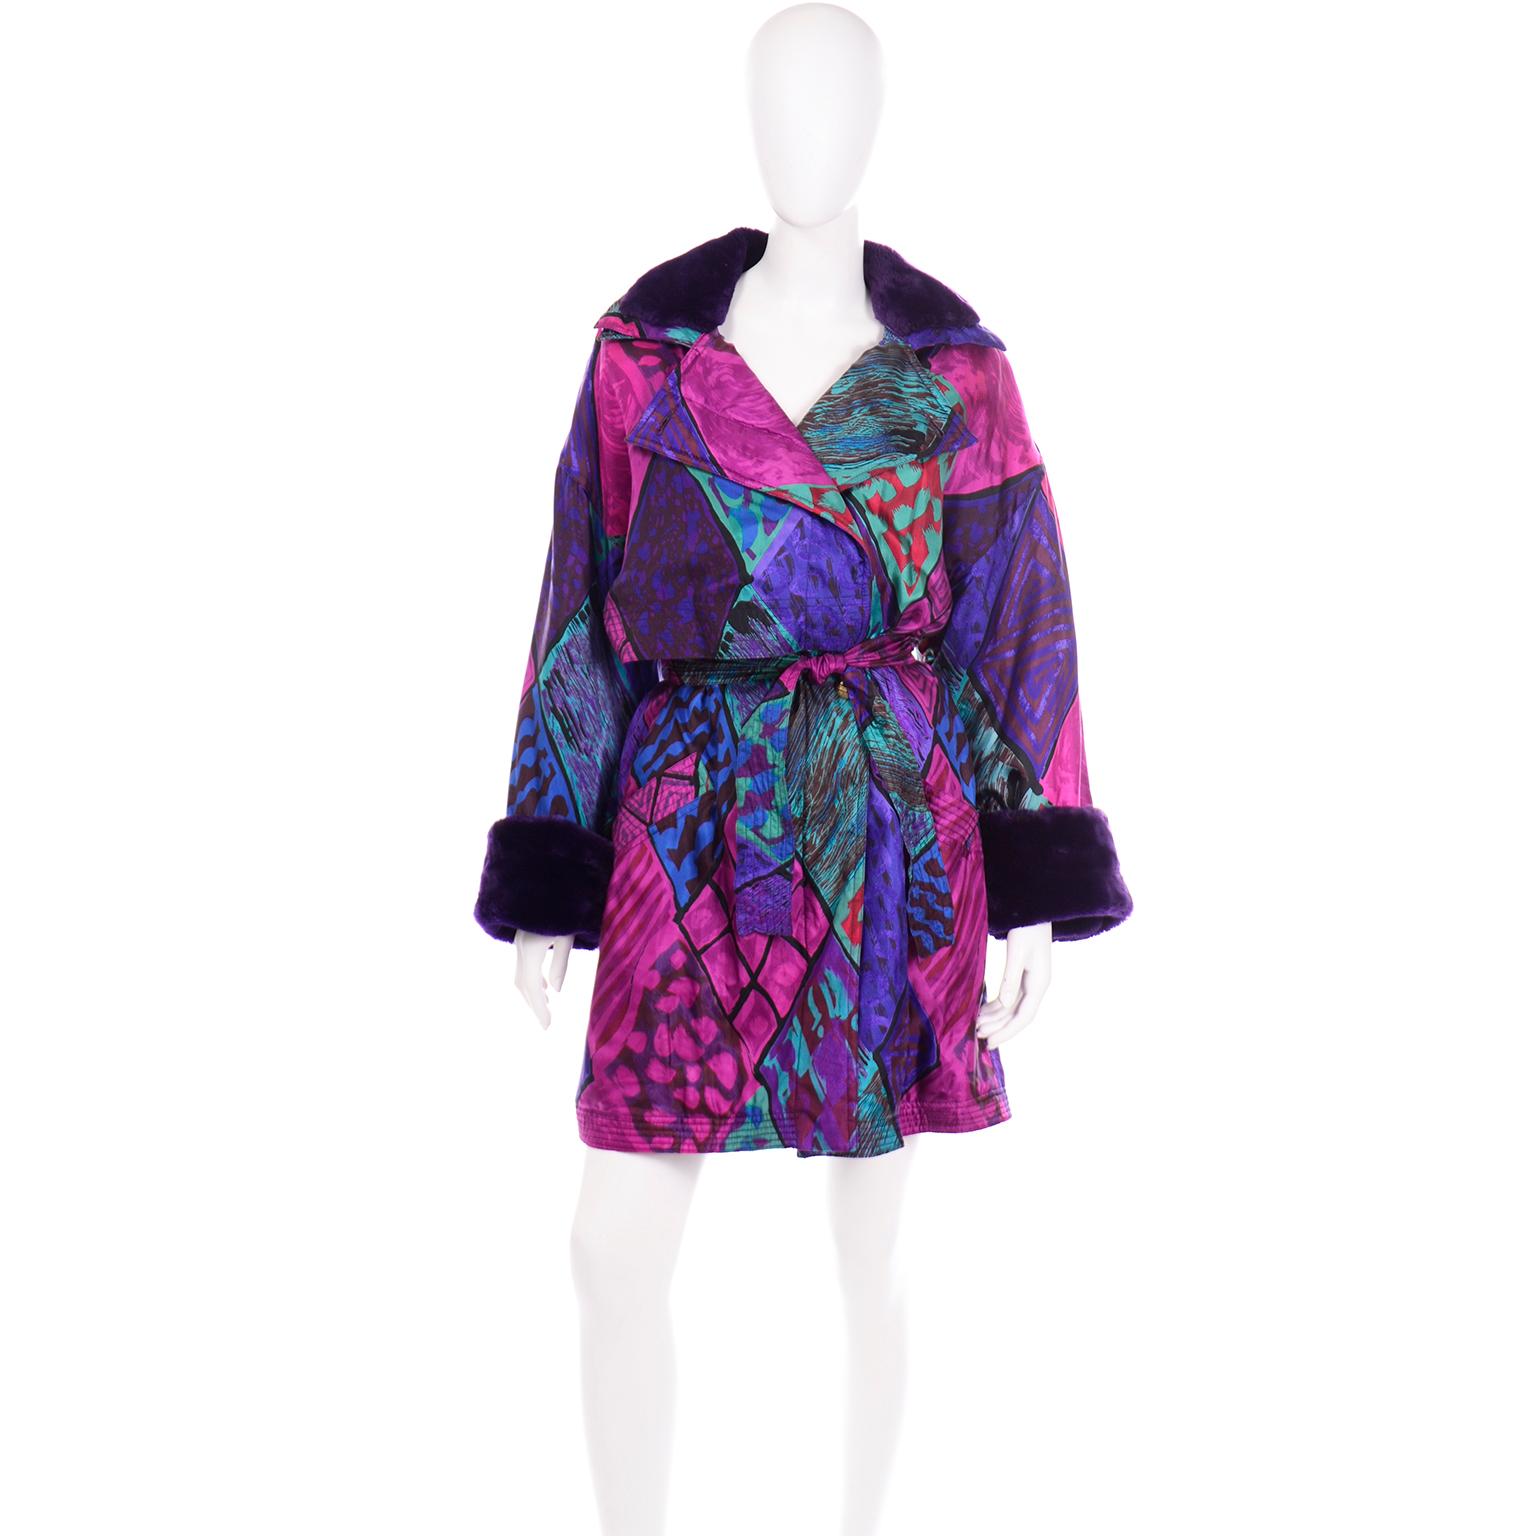 This vintage Versace Sport coat is simply gorgeous and we love the colorful silk fabric with purple faux fur collar and cuffs. The colors of the abstract silk print consist of purple, magenta, burgundy, green, teal, blue, and black. This coat has